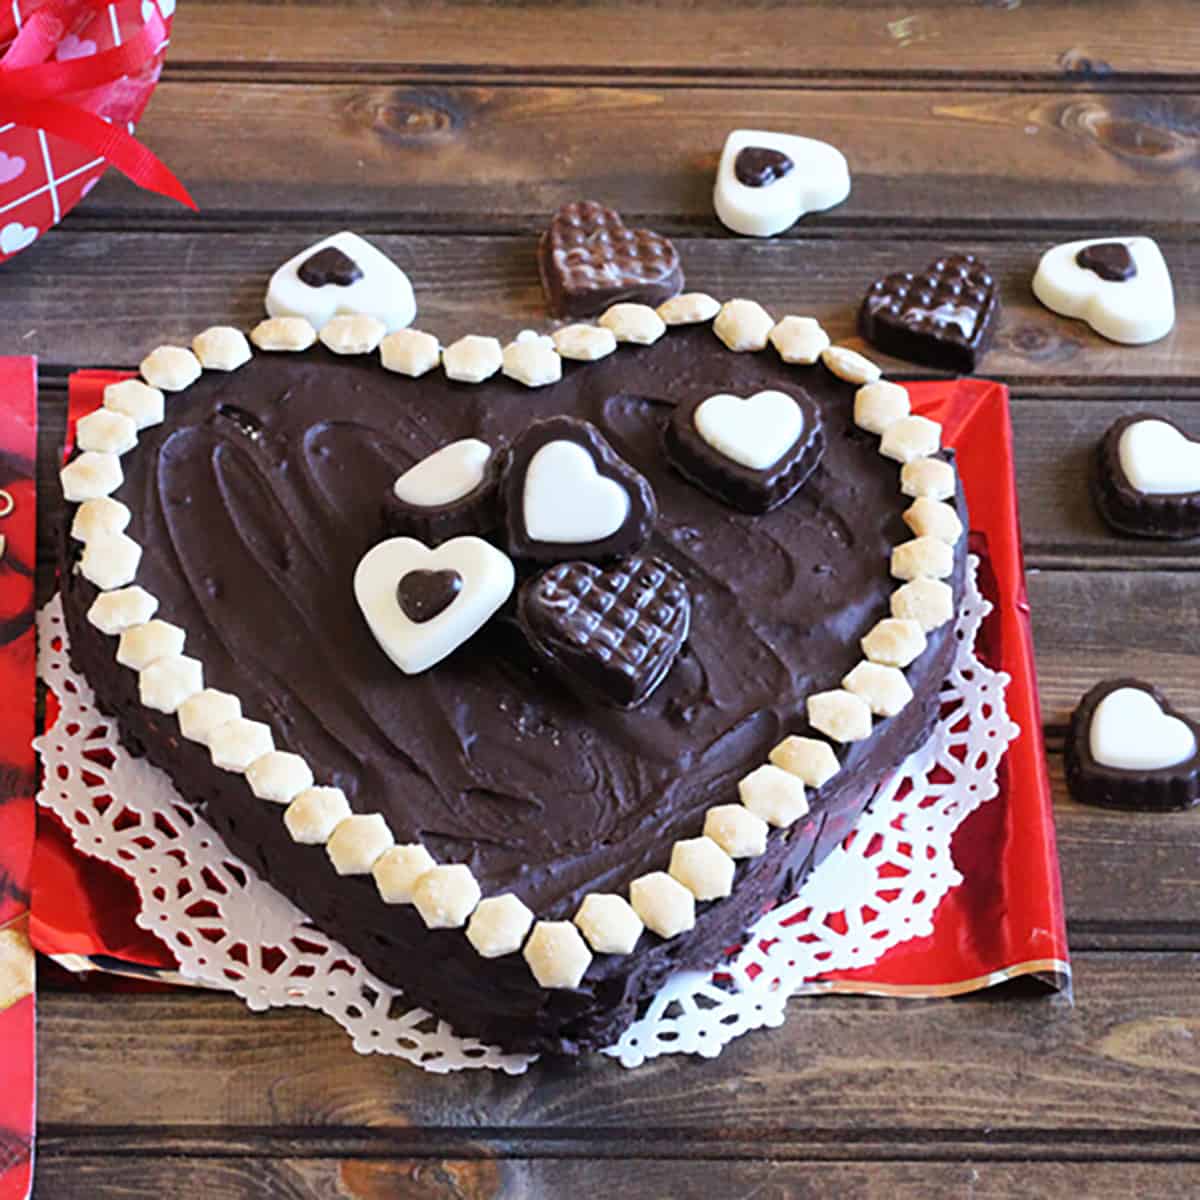 No Bake Chocolate Biscuit Cake | Valentine's Day Heart-Shaped Cake | Queen Elizabeth's Favorite Cake.